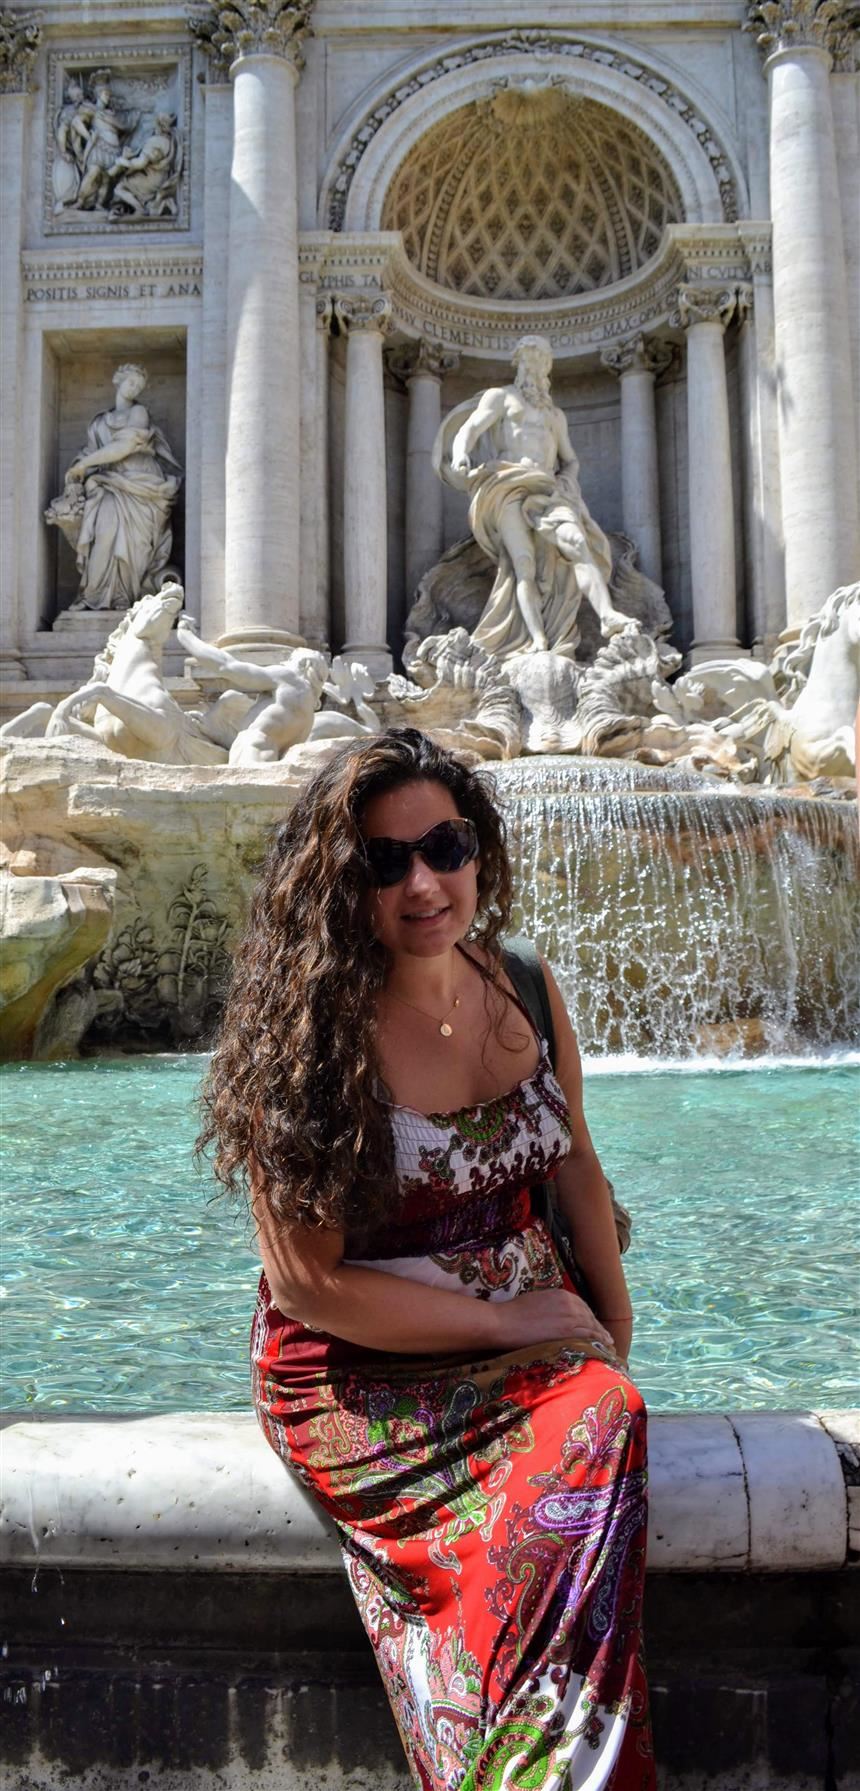 Ms. Zulic in front of the Trevi Fountain; property of Ms. Zulic 